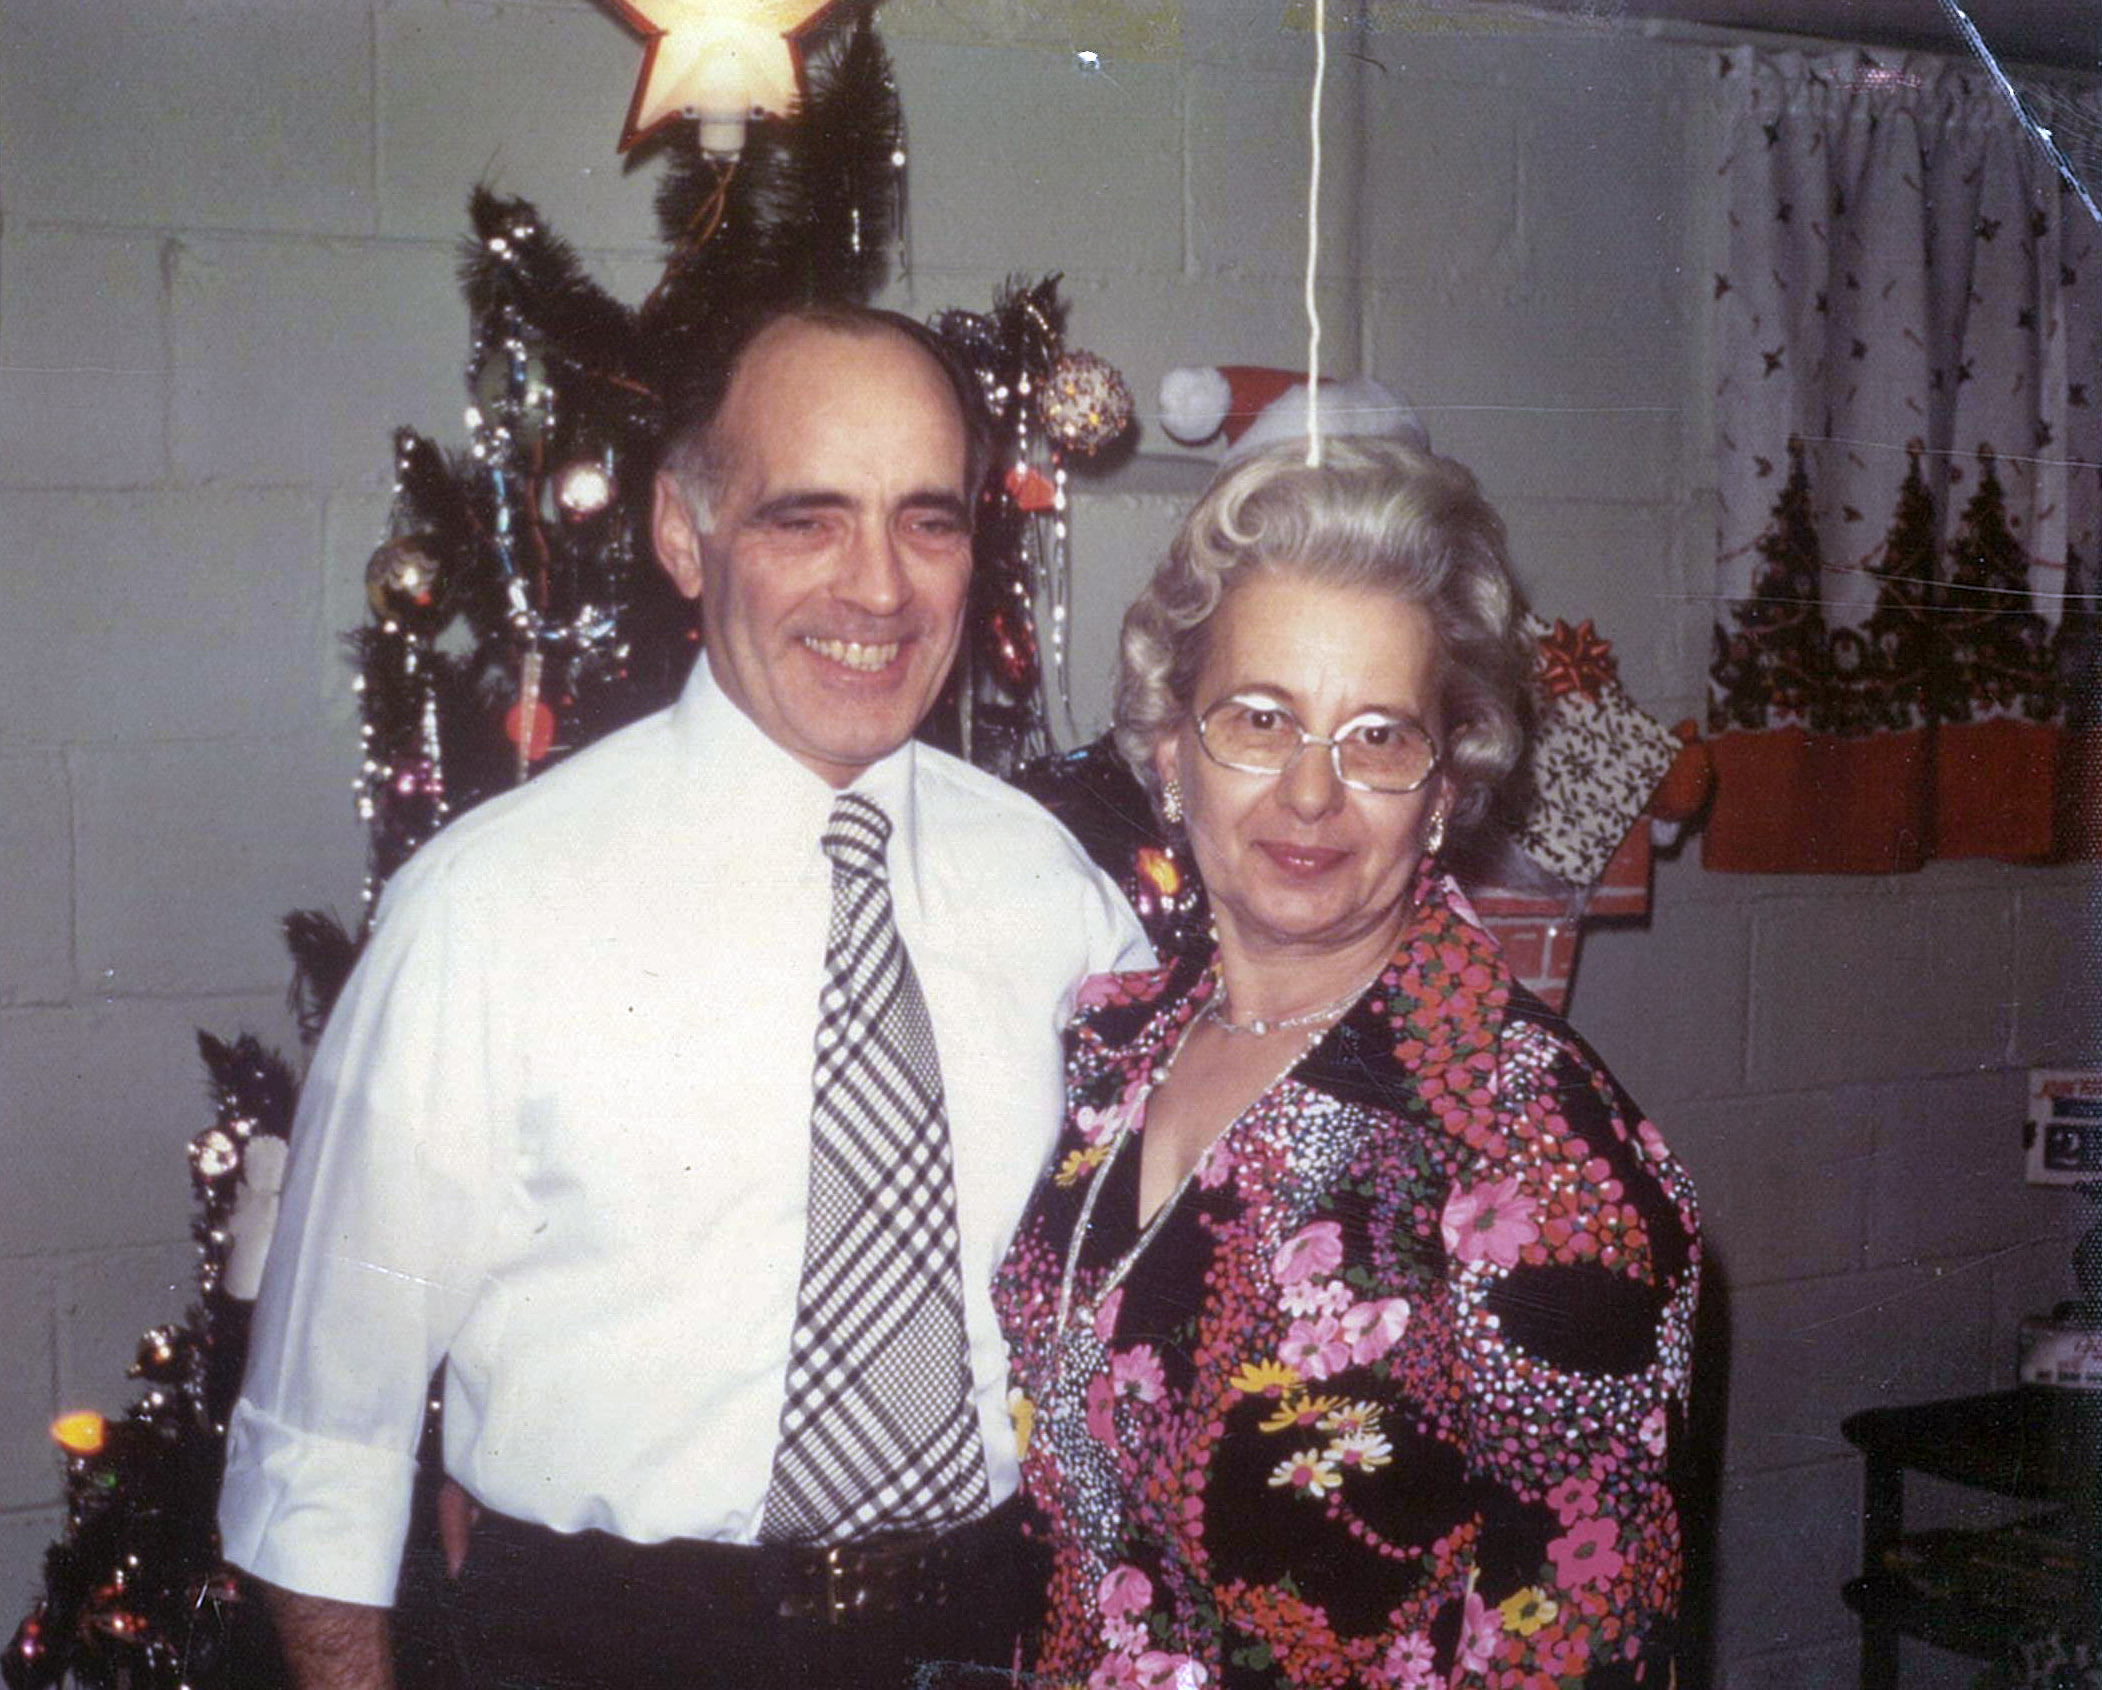 My grandparents, Norm & Mary Ouellette, in their basement sometime in the 1970's. View full size.